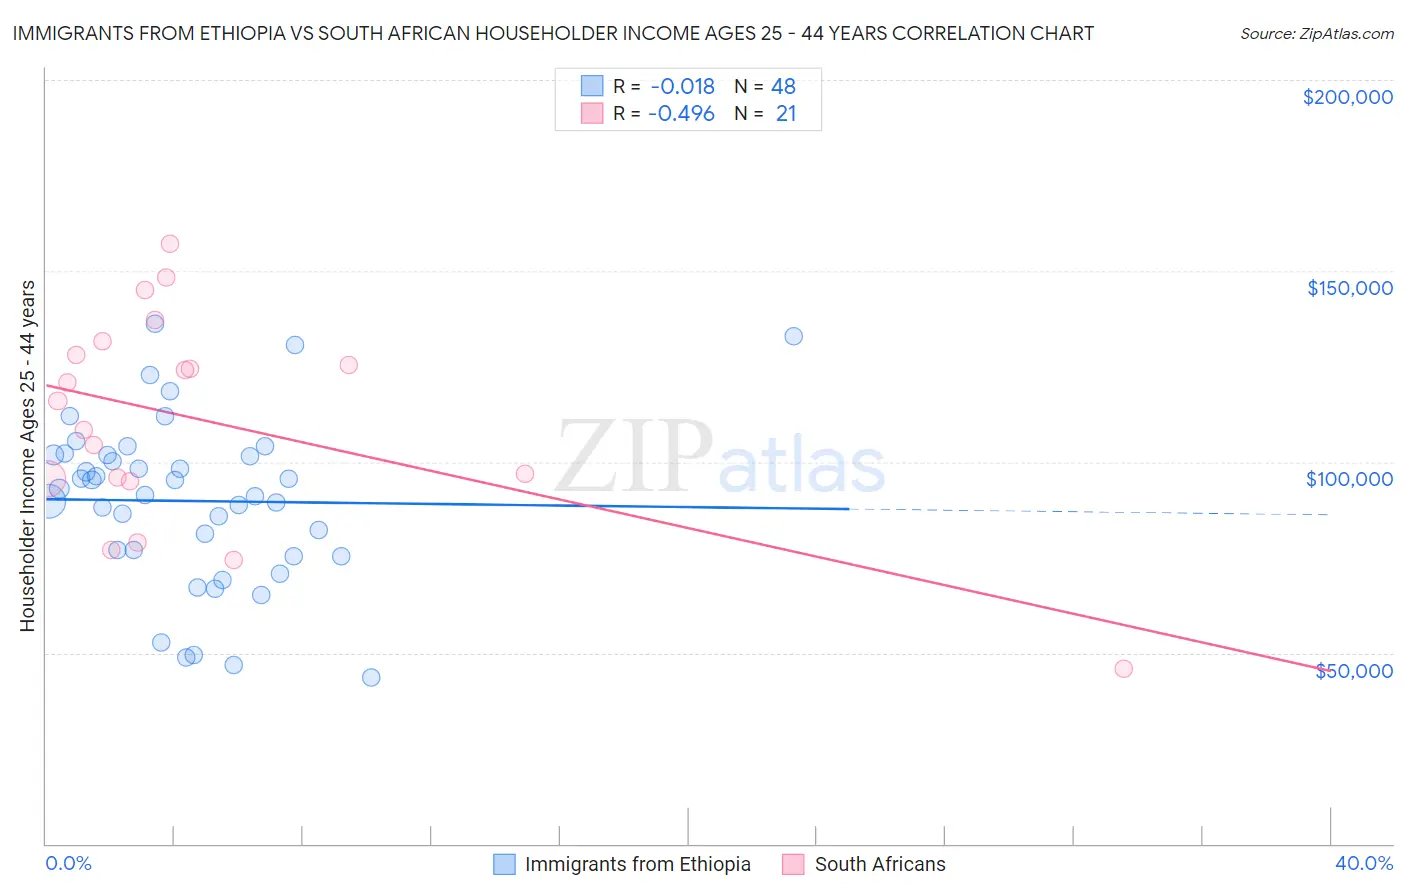 Immigrants from Ethiopia vs South African Householder Income Ages 25 - 44 years